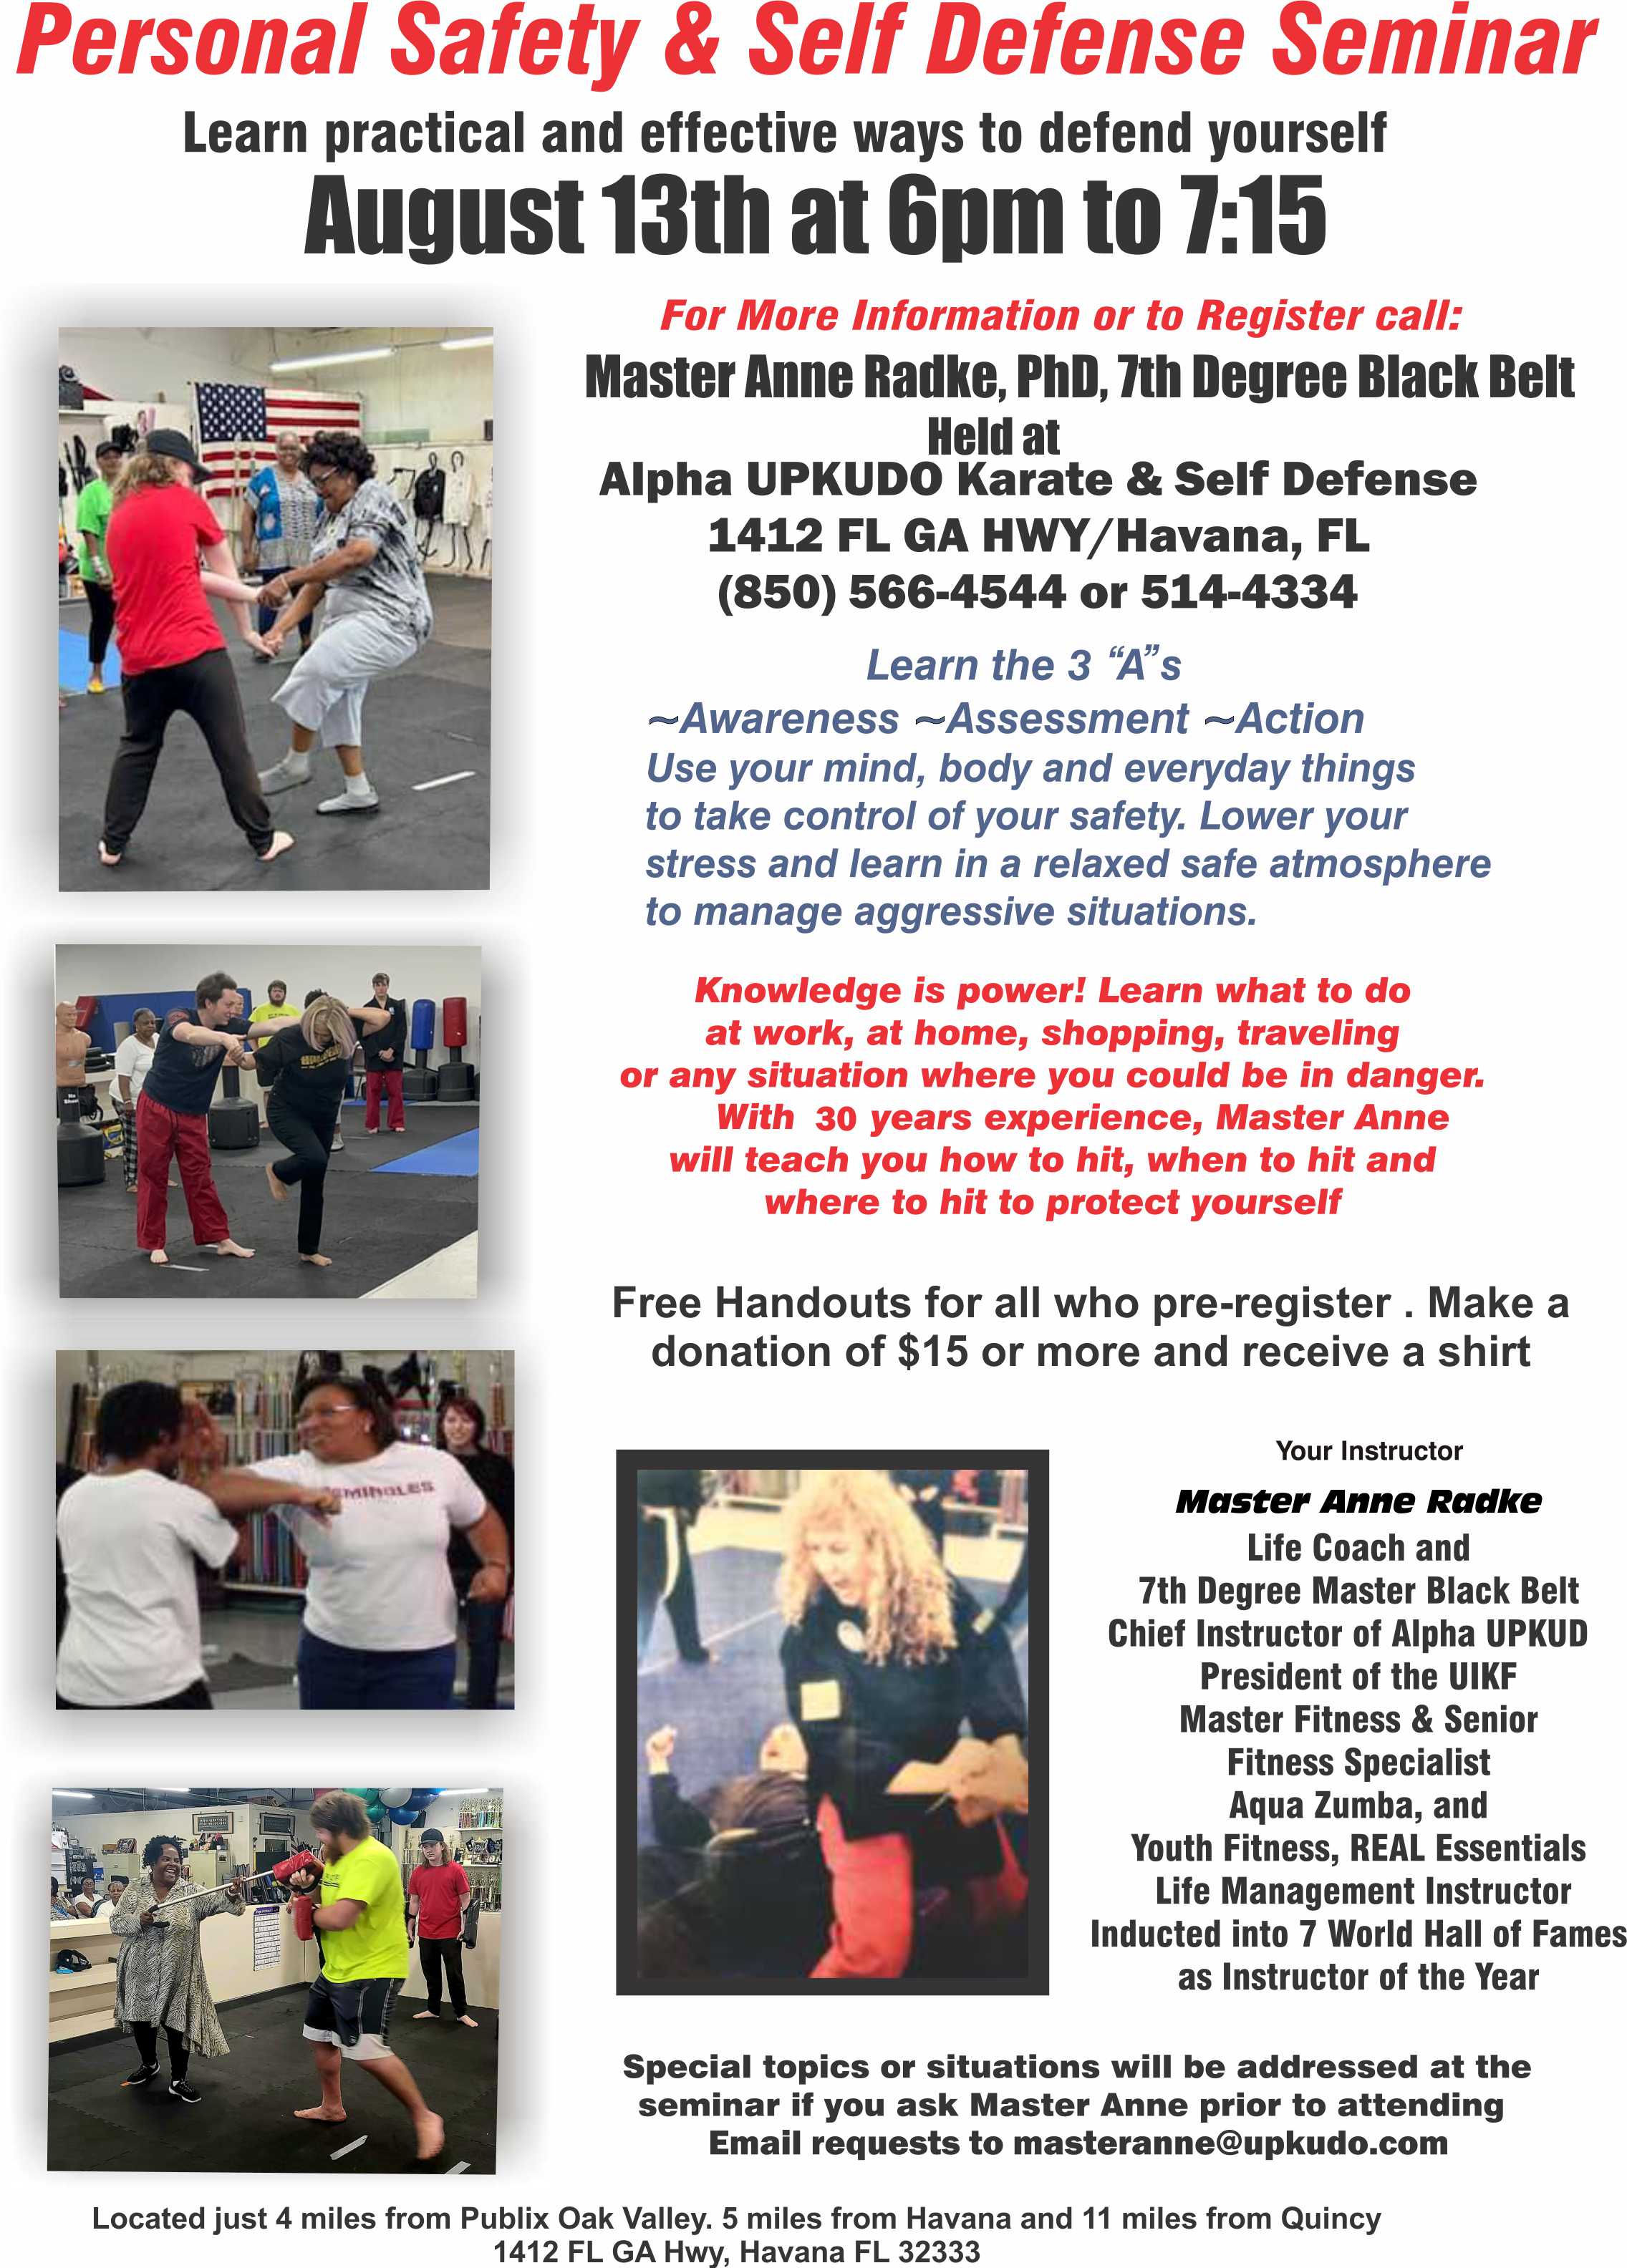 Personal Safety and Self Defense Seminar. Learn practical and effective ways to defend yourself. August 13th at 6pm to 7:15pm. For more information or to register call Master Anne Radke, PhD, 7th Degree Black Belt, held at Alpha UPKUDO Karate and Self Defense 1412 FL GA HWY, Havana, FL 850-566-4544 or 850-514-4334. Free Handouts for all who pre-register. Make a donation of $15 or more and receive a shirt. Special topics will be addressed at the seminar if you ask Master Anne prior to attending. Email requests to masteranne@upkudo.com. Located at 1412 FL GA Hwy, Havana, FL 32333.